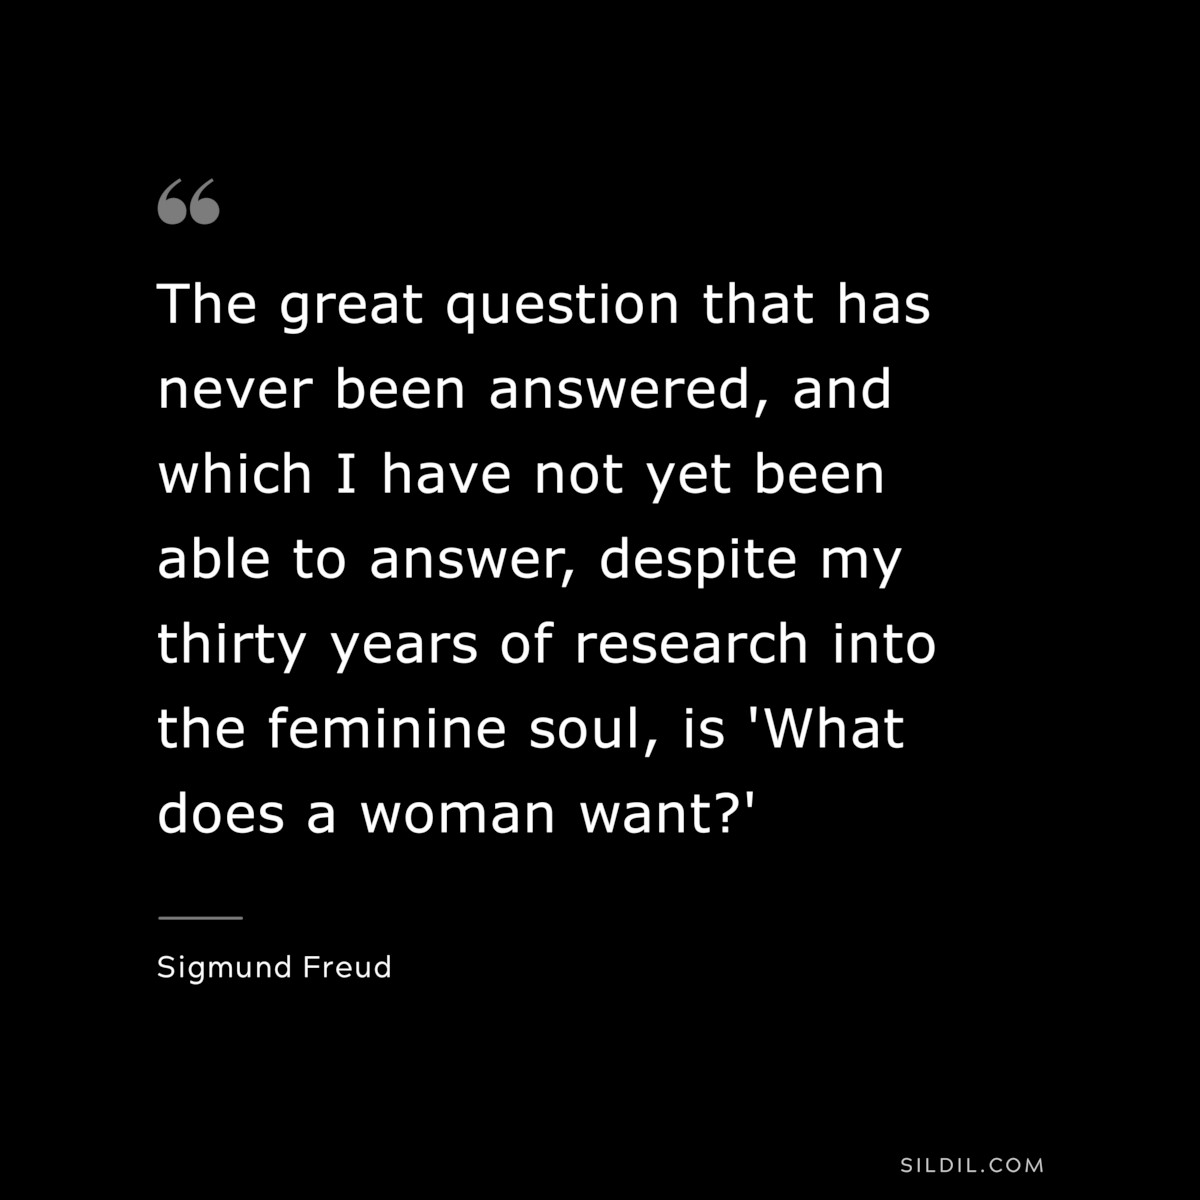 The great question that has never been answered, and which I have not yet been able to answer, despite my thirty years of research into the feminine soul, is 'What does a woman want?' ― Sigmund Frued